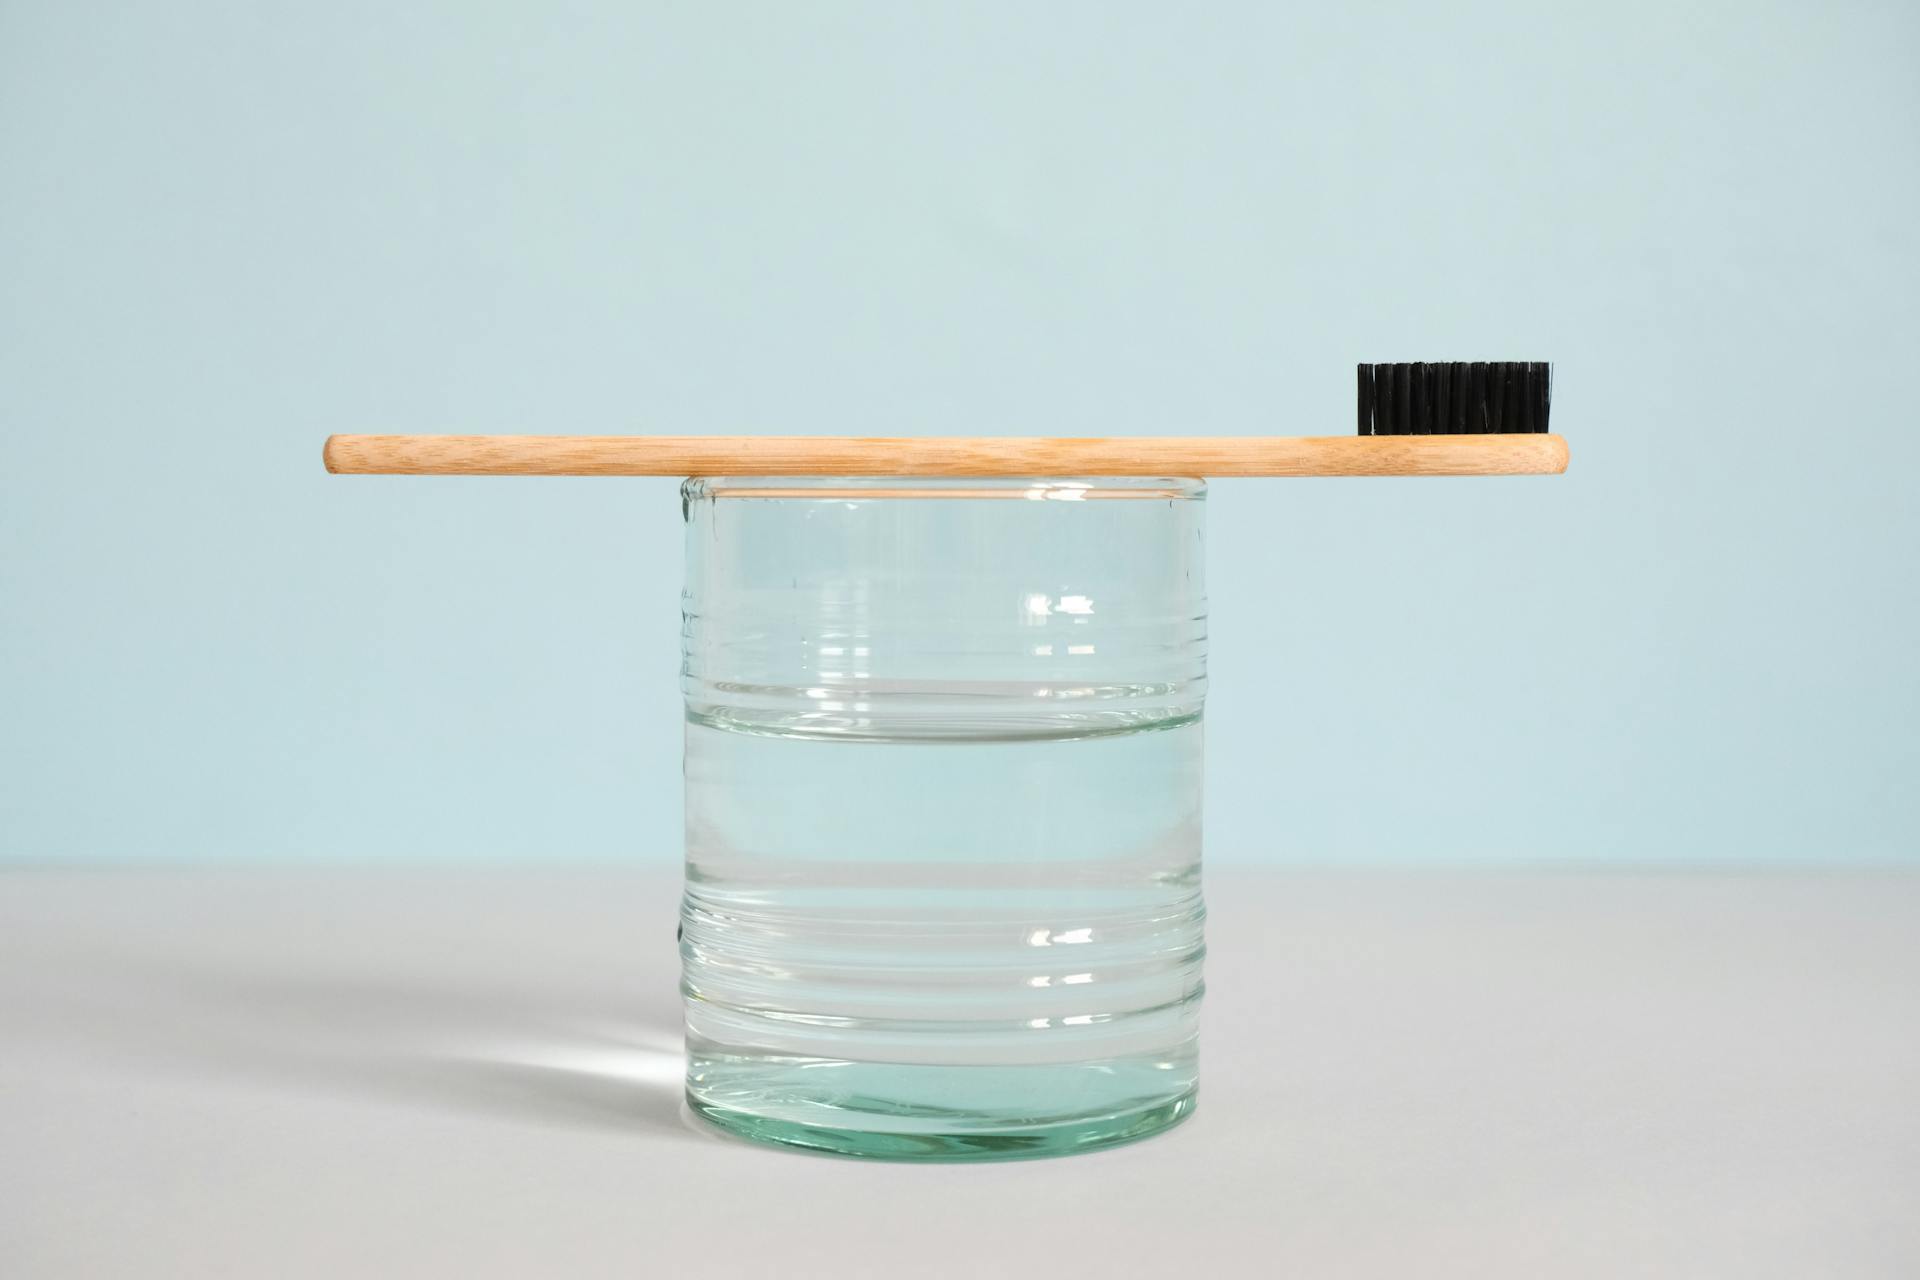 A toothbrush placed on a glass of water | Source: Pexels